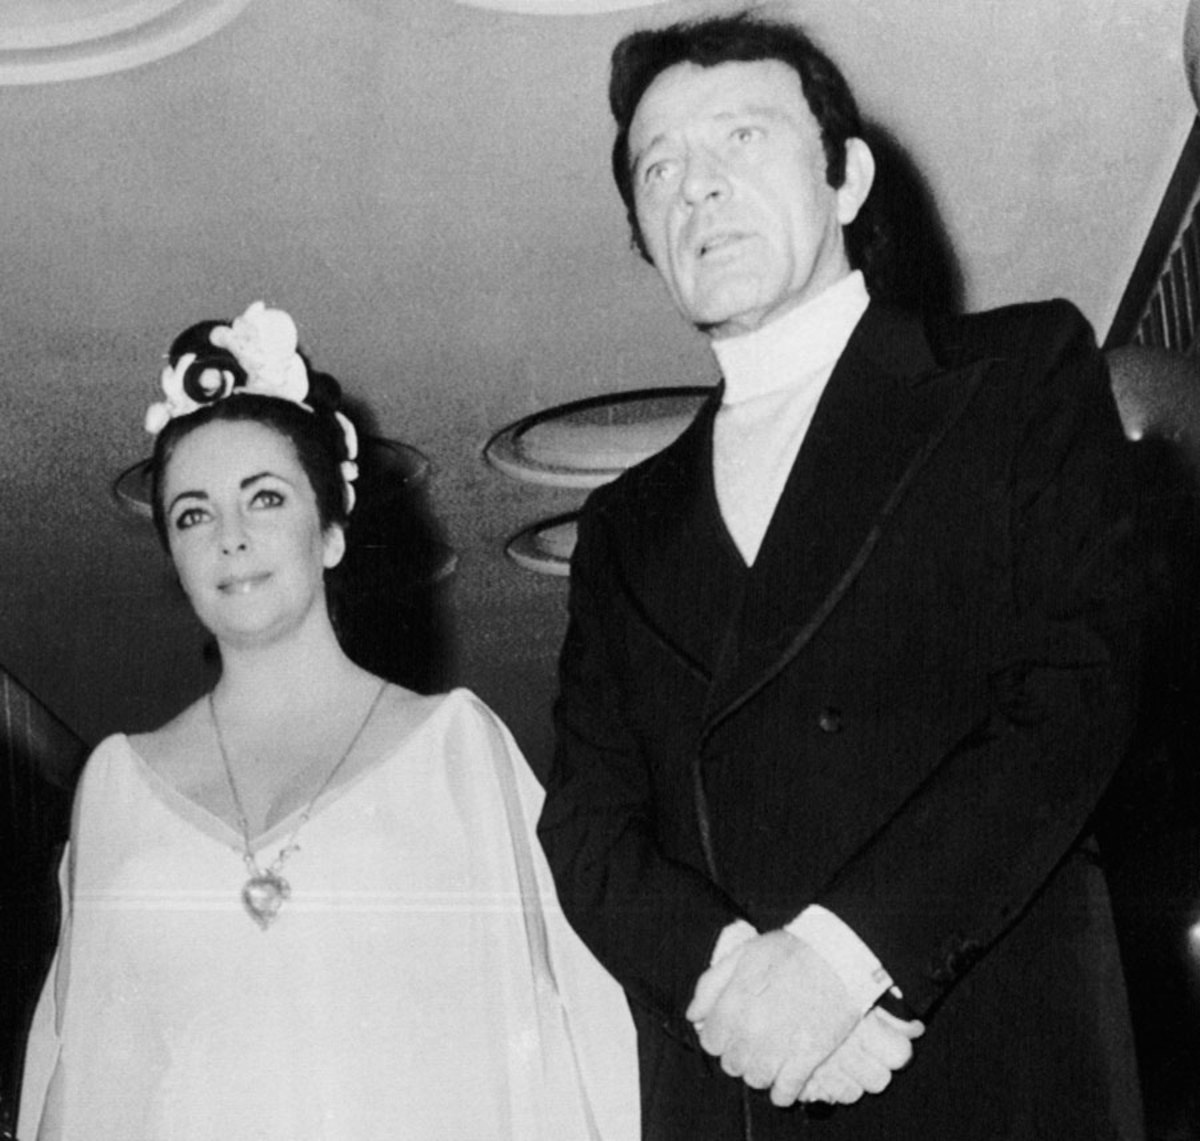 Elizabeth Taylor, wearing the Taj Mahal pendant, and Richard Burton arrive at her $72,000 star-studded 40th birthday party.